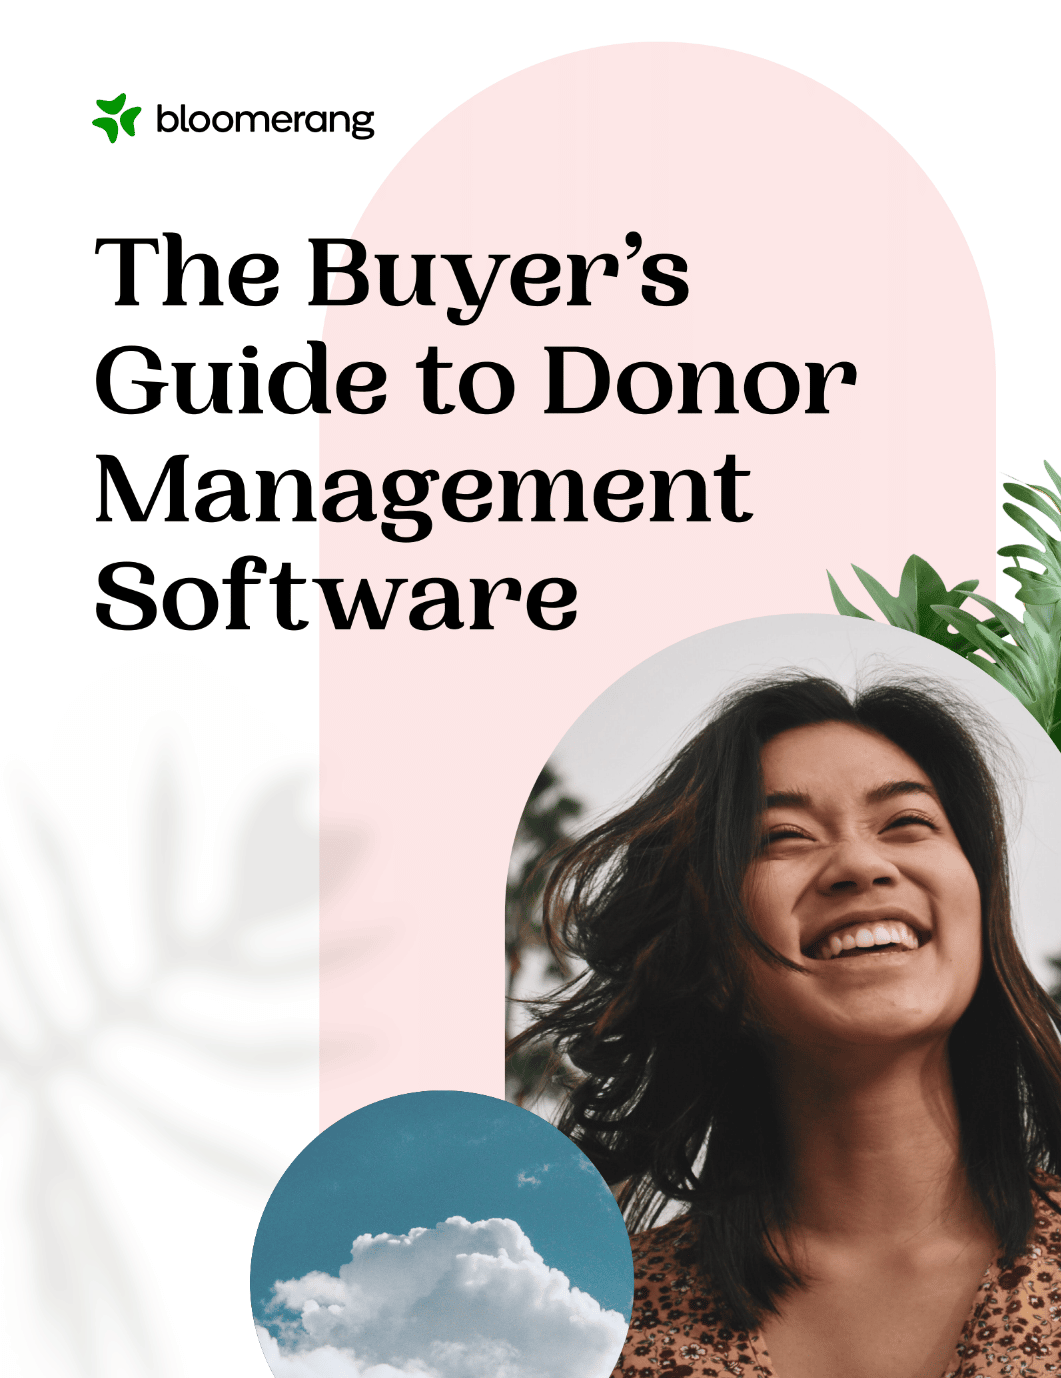 The ebook cover of The Buyer's Guide to Donor Management Software is shown with Bloomerang's distinctive logo on a white background with a large secondary element of an begonia colored arch. Within it are more graphic elements like monstera leaves, a cloud and an image of a woman smiling.